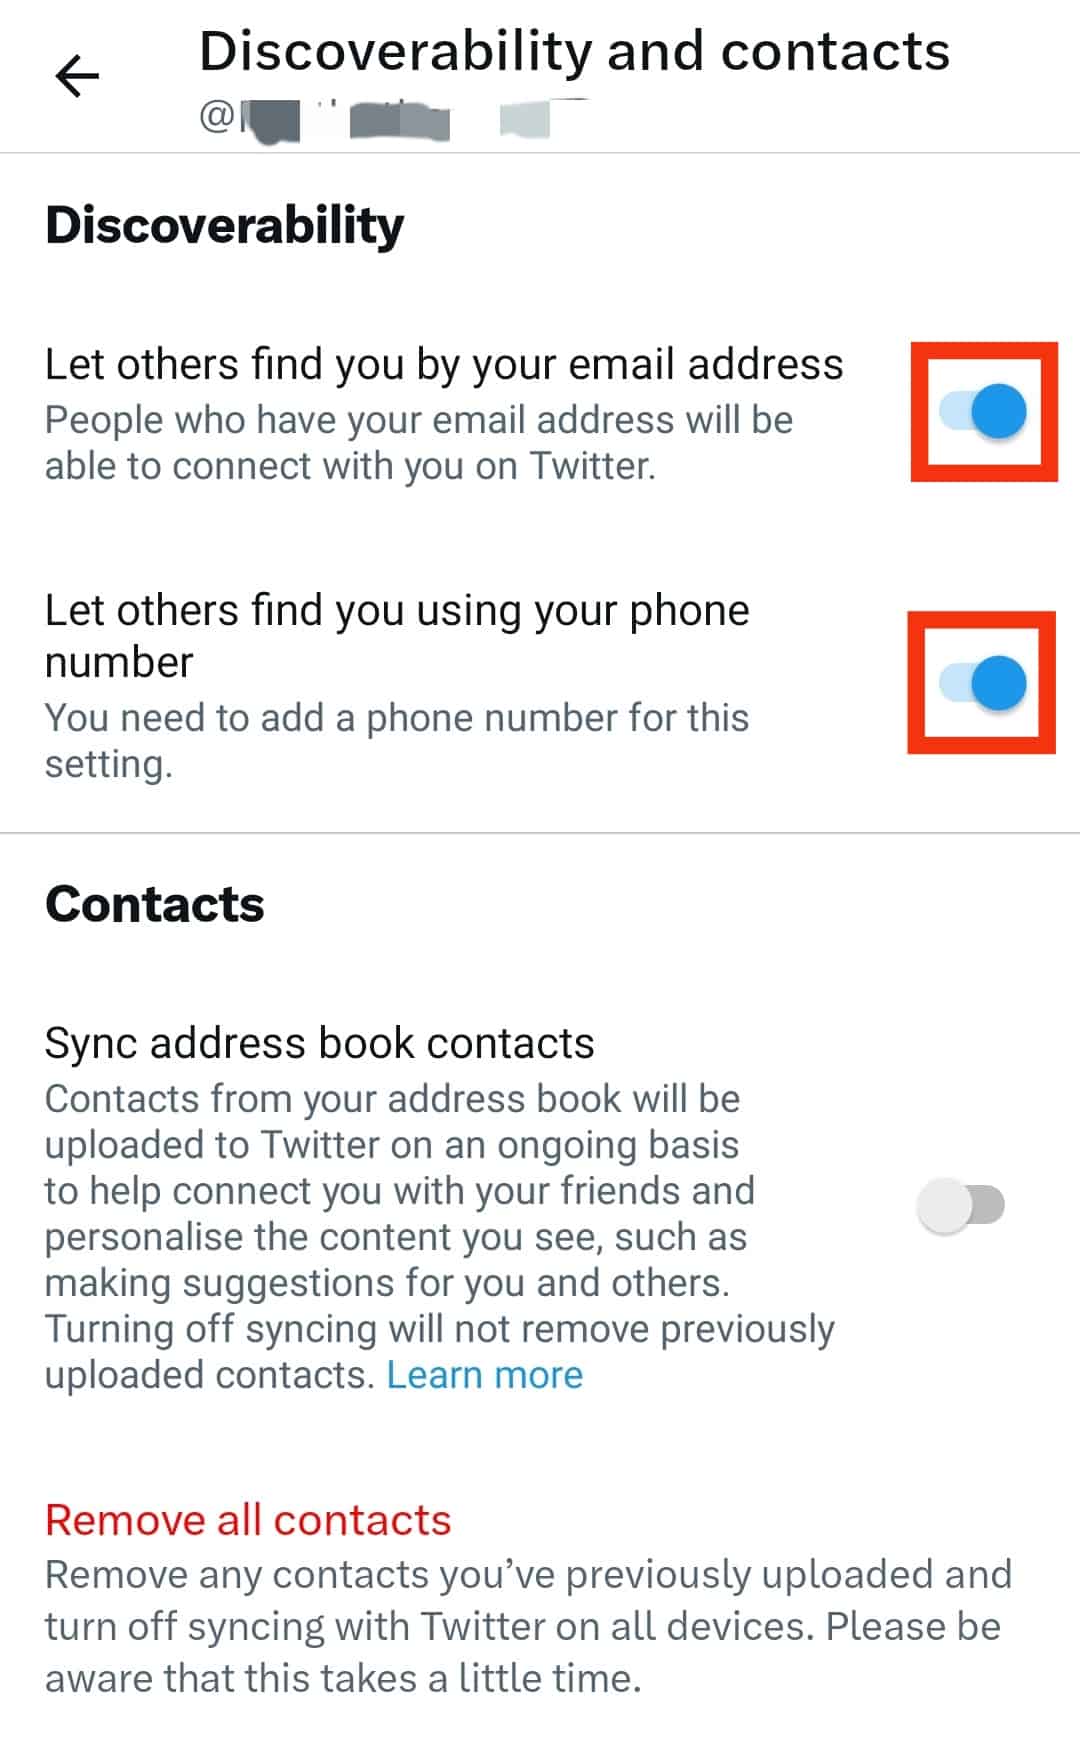 Turn On The 'Let Others Find You By Your Email Address' And 'Let Others Find You By Your Phone Number'.